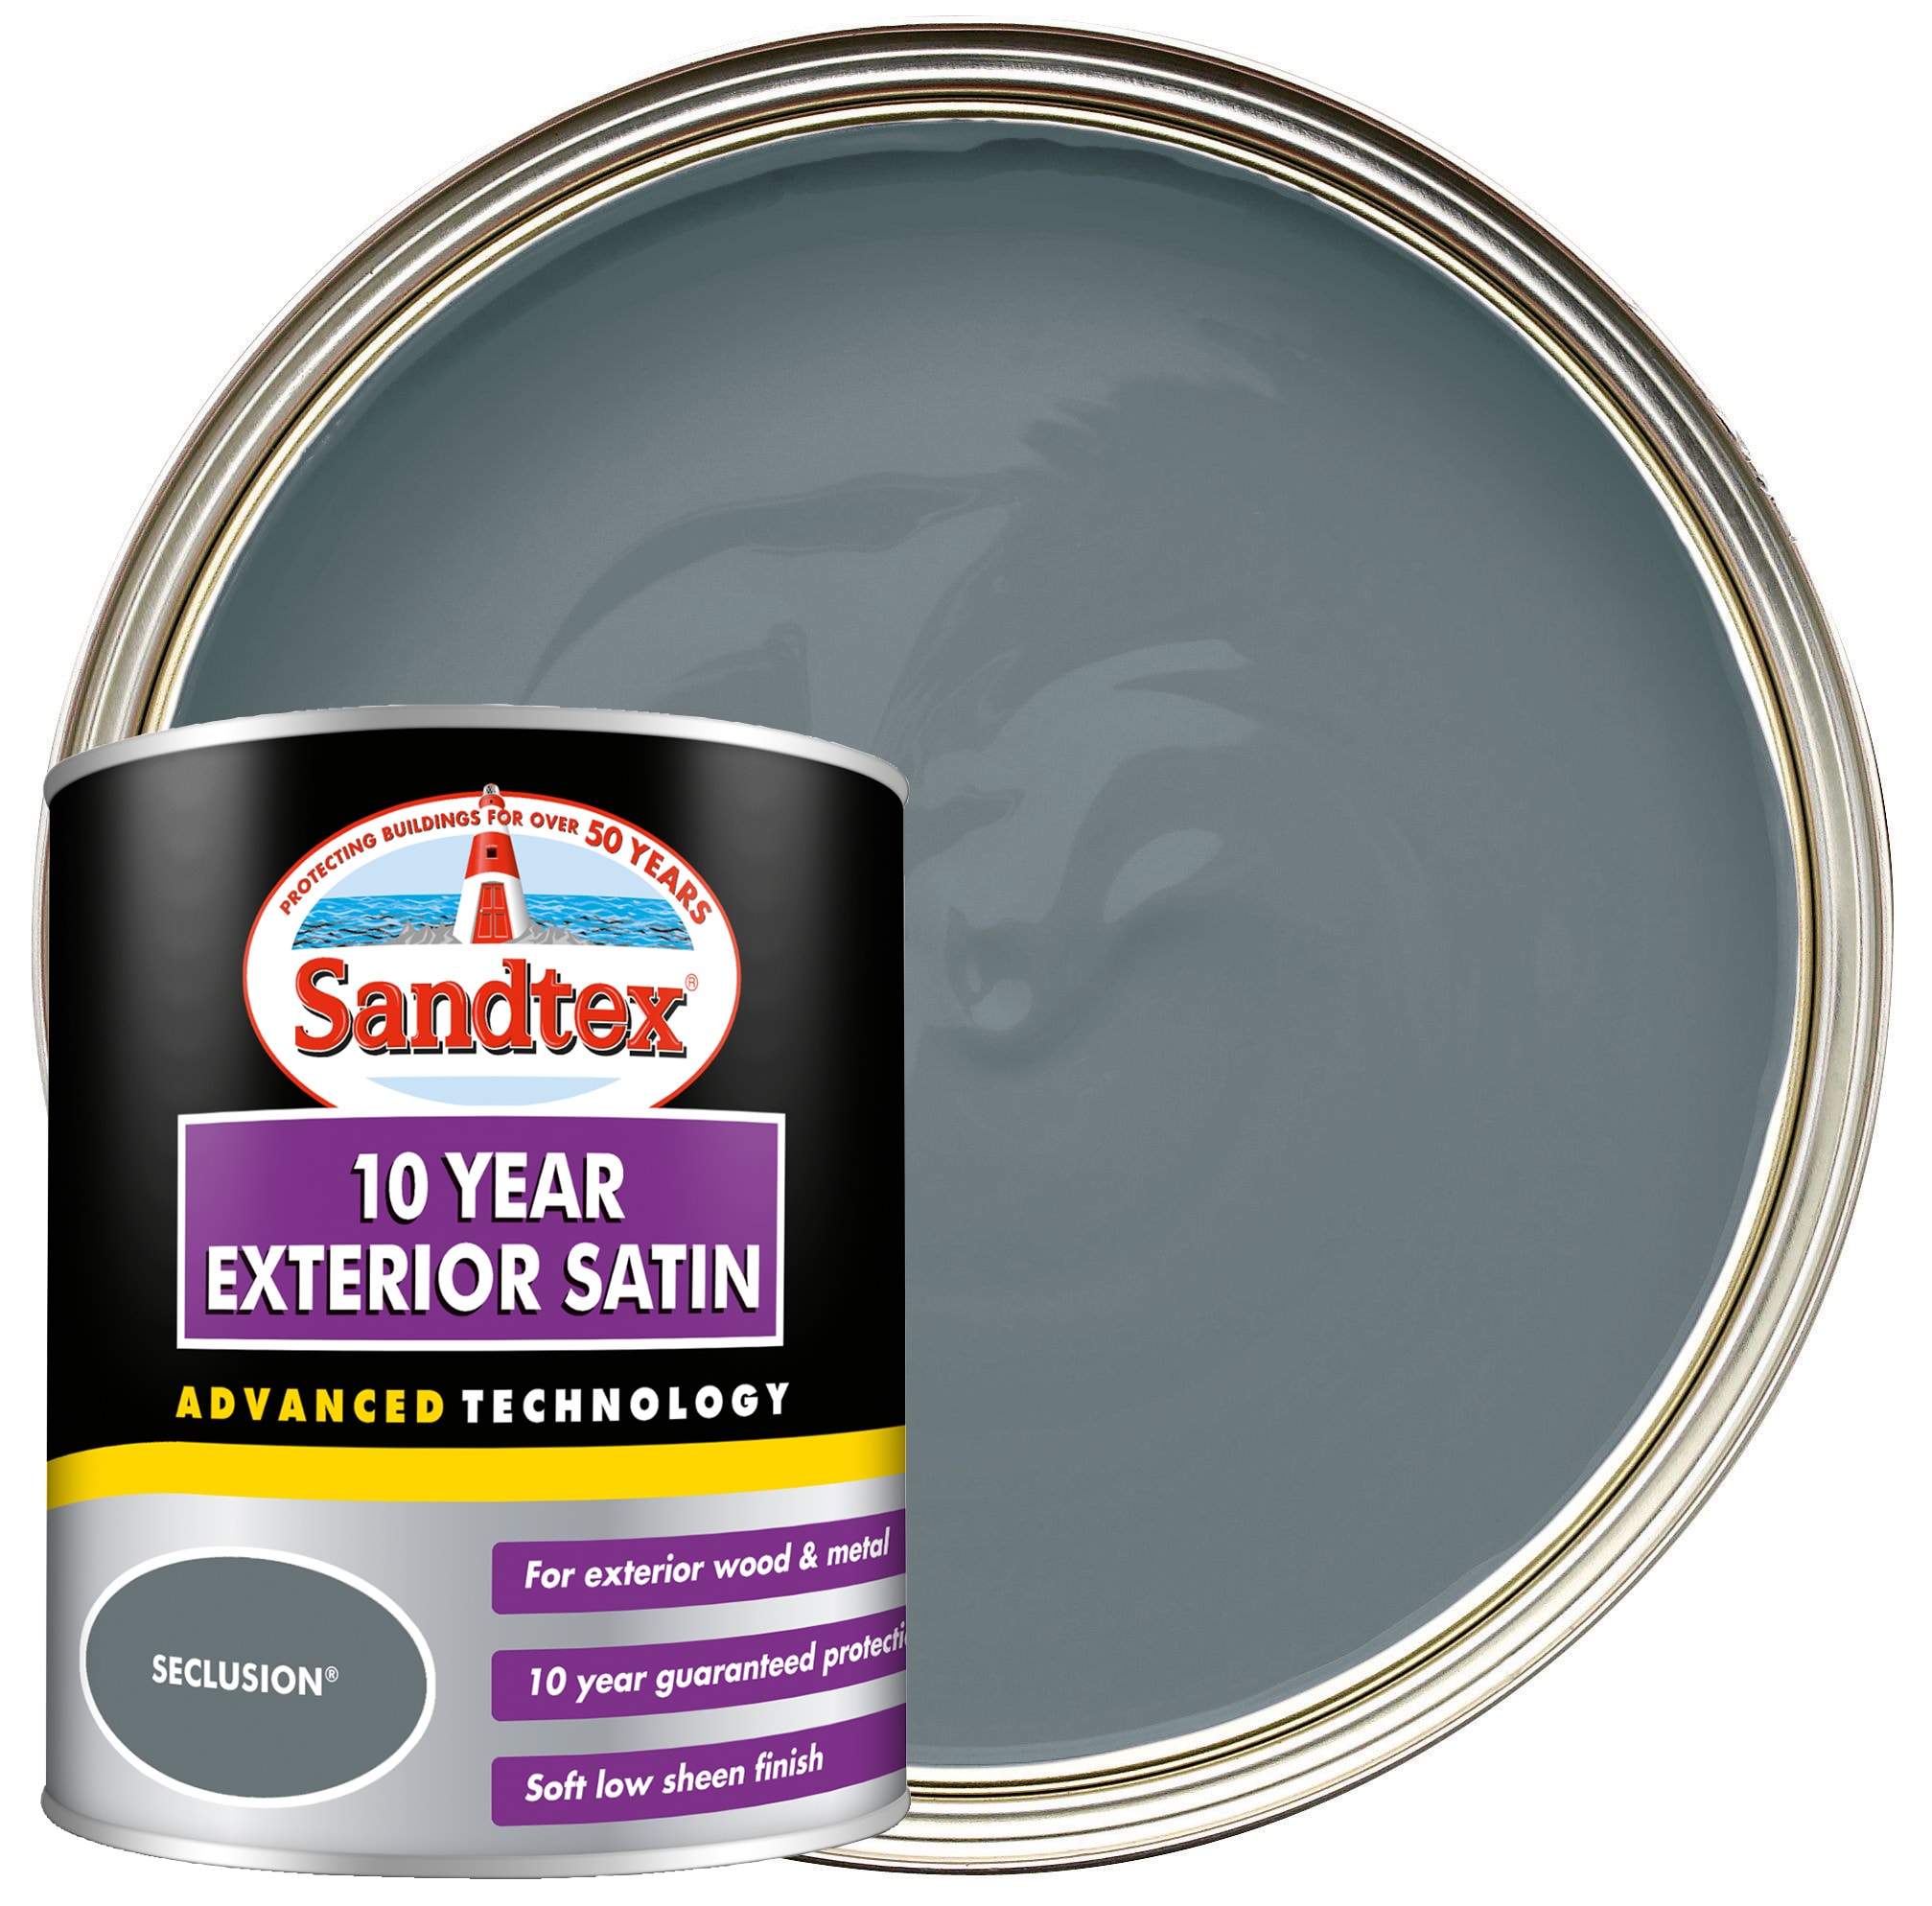 Sandtex 10 Year Exterior Satin Paint - Seclusion